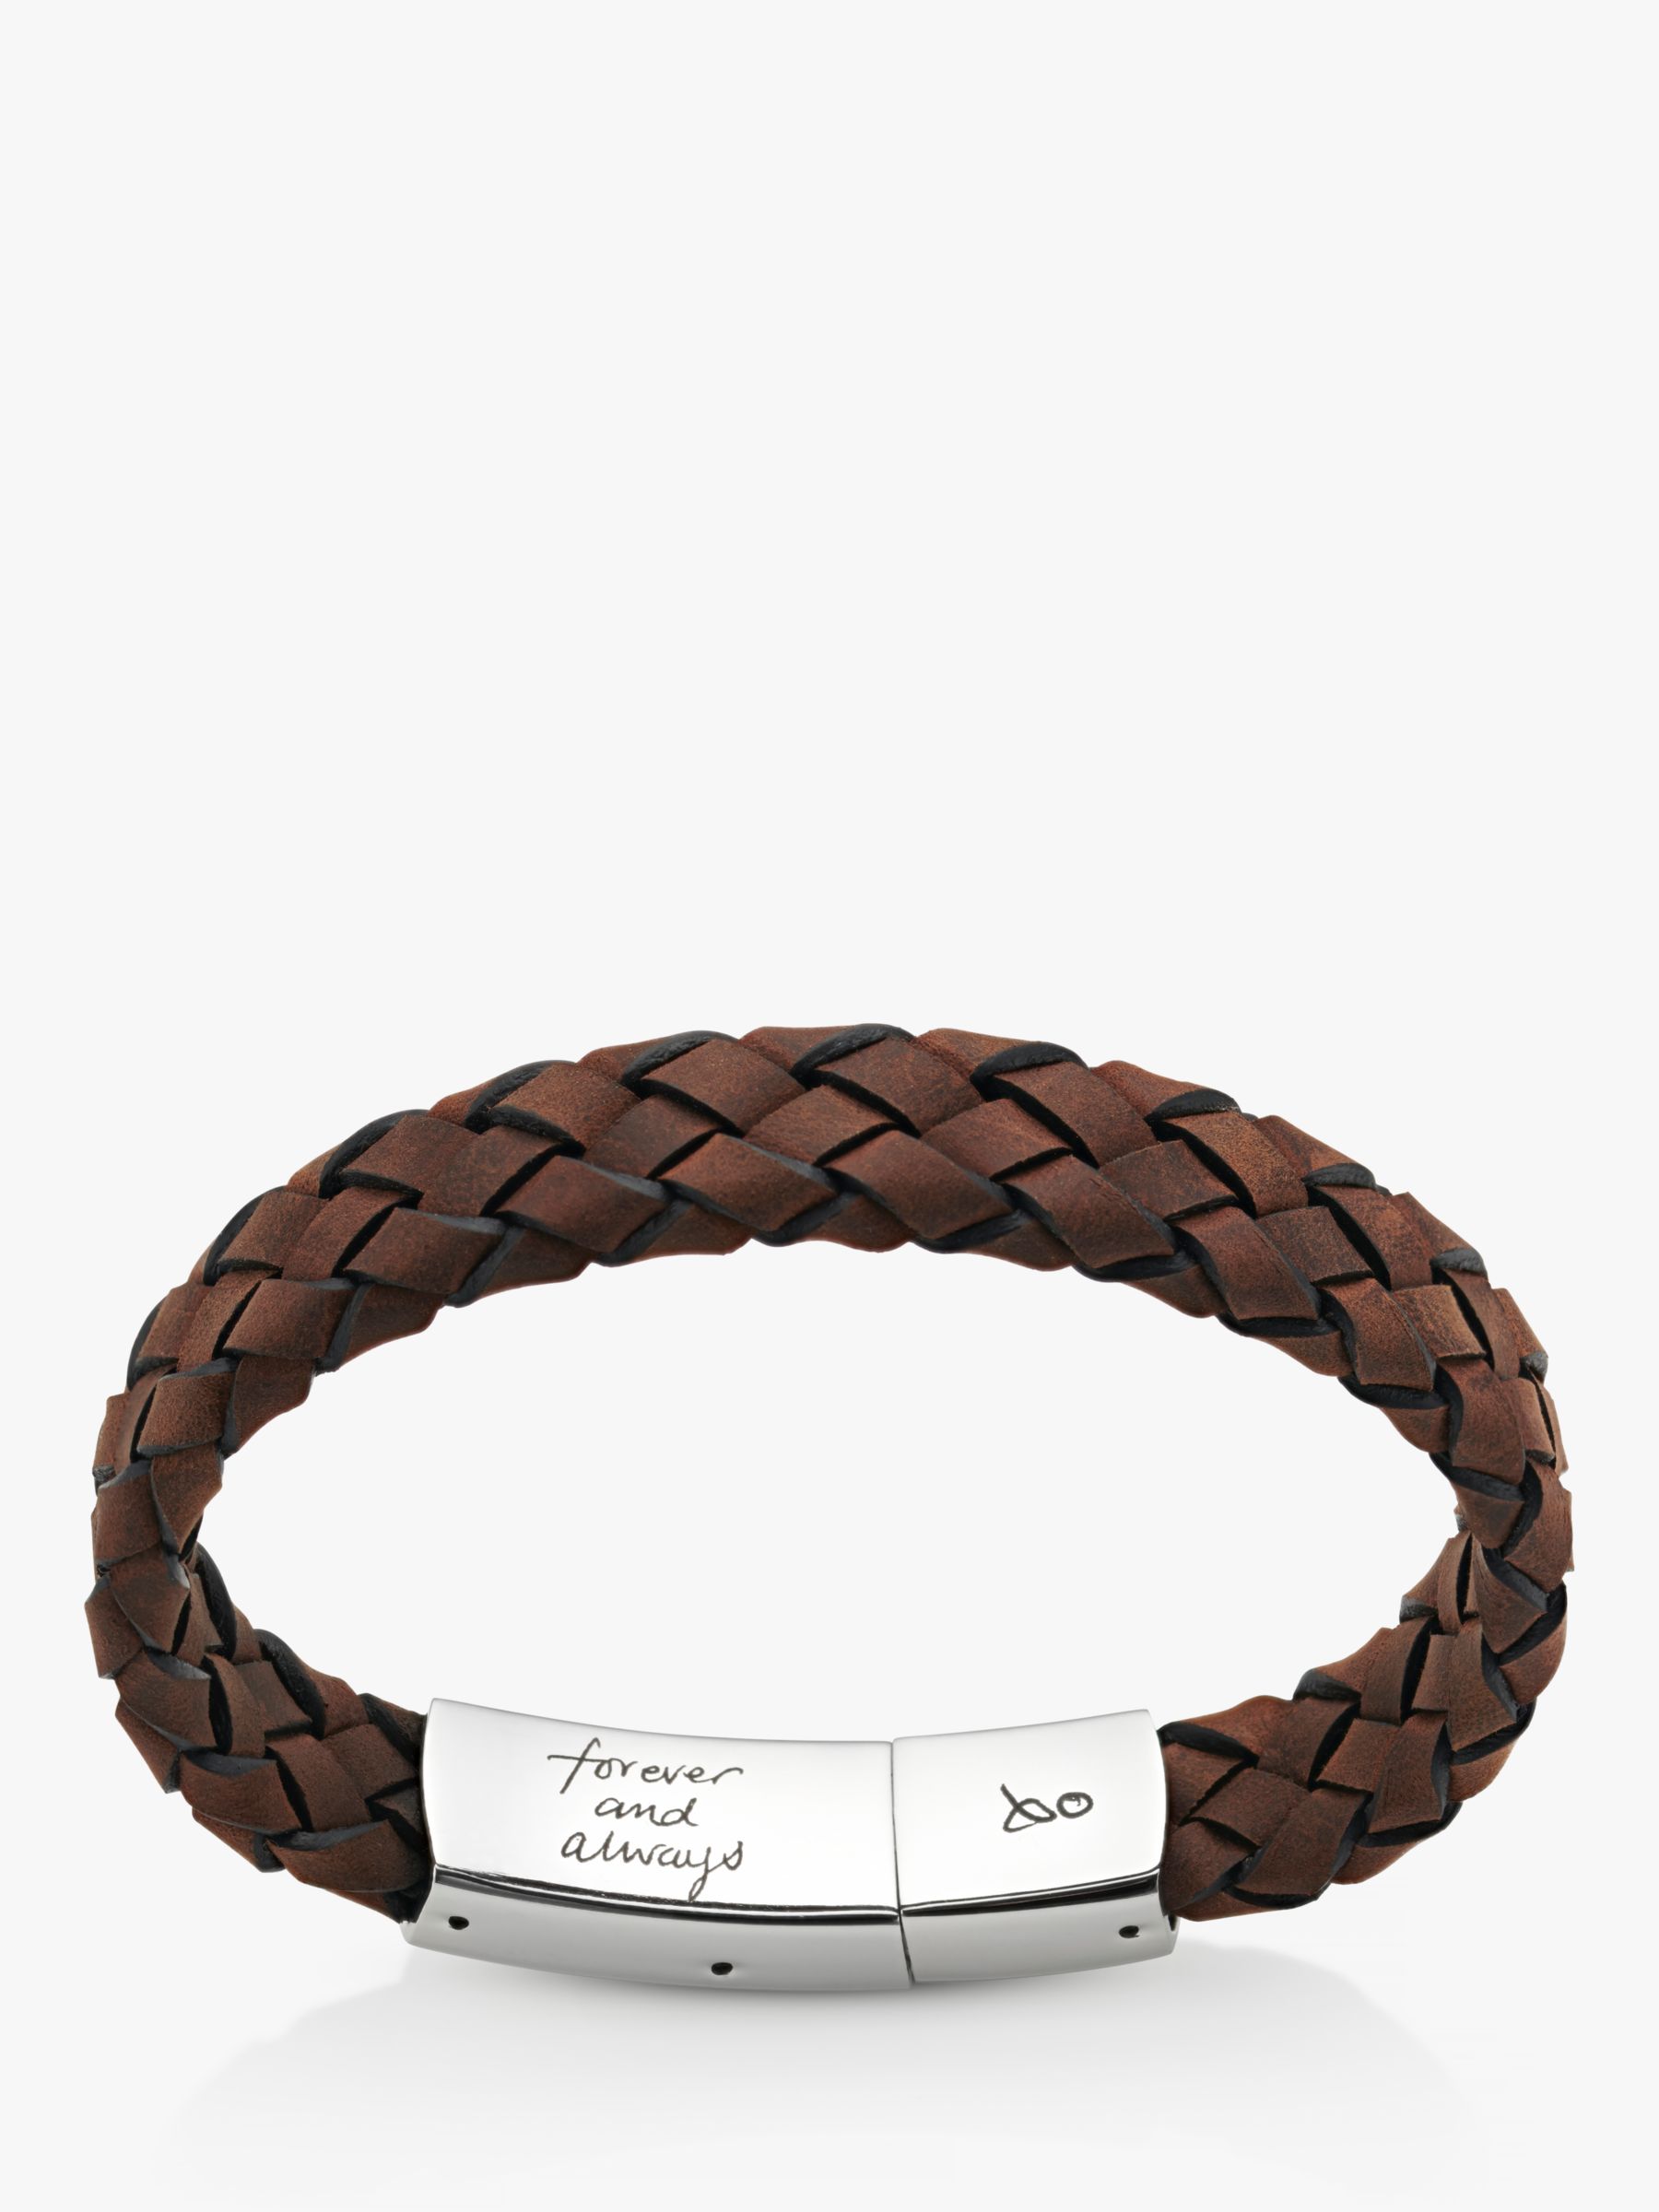 Under the Rose Personalised Men's Woven Leather Bracelet